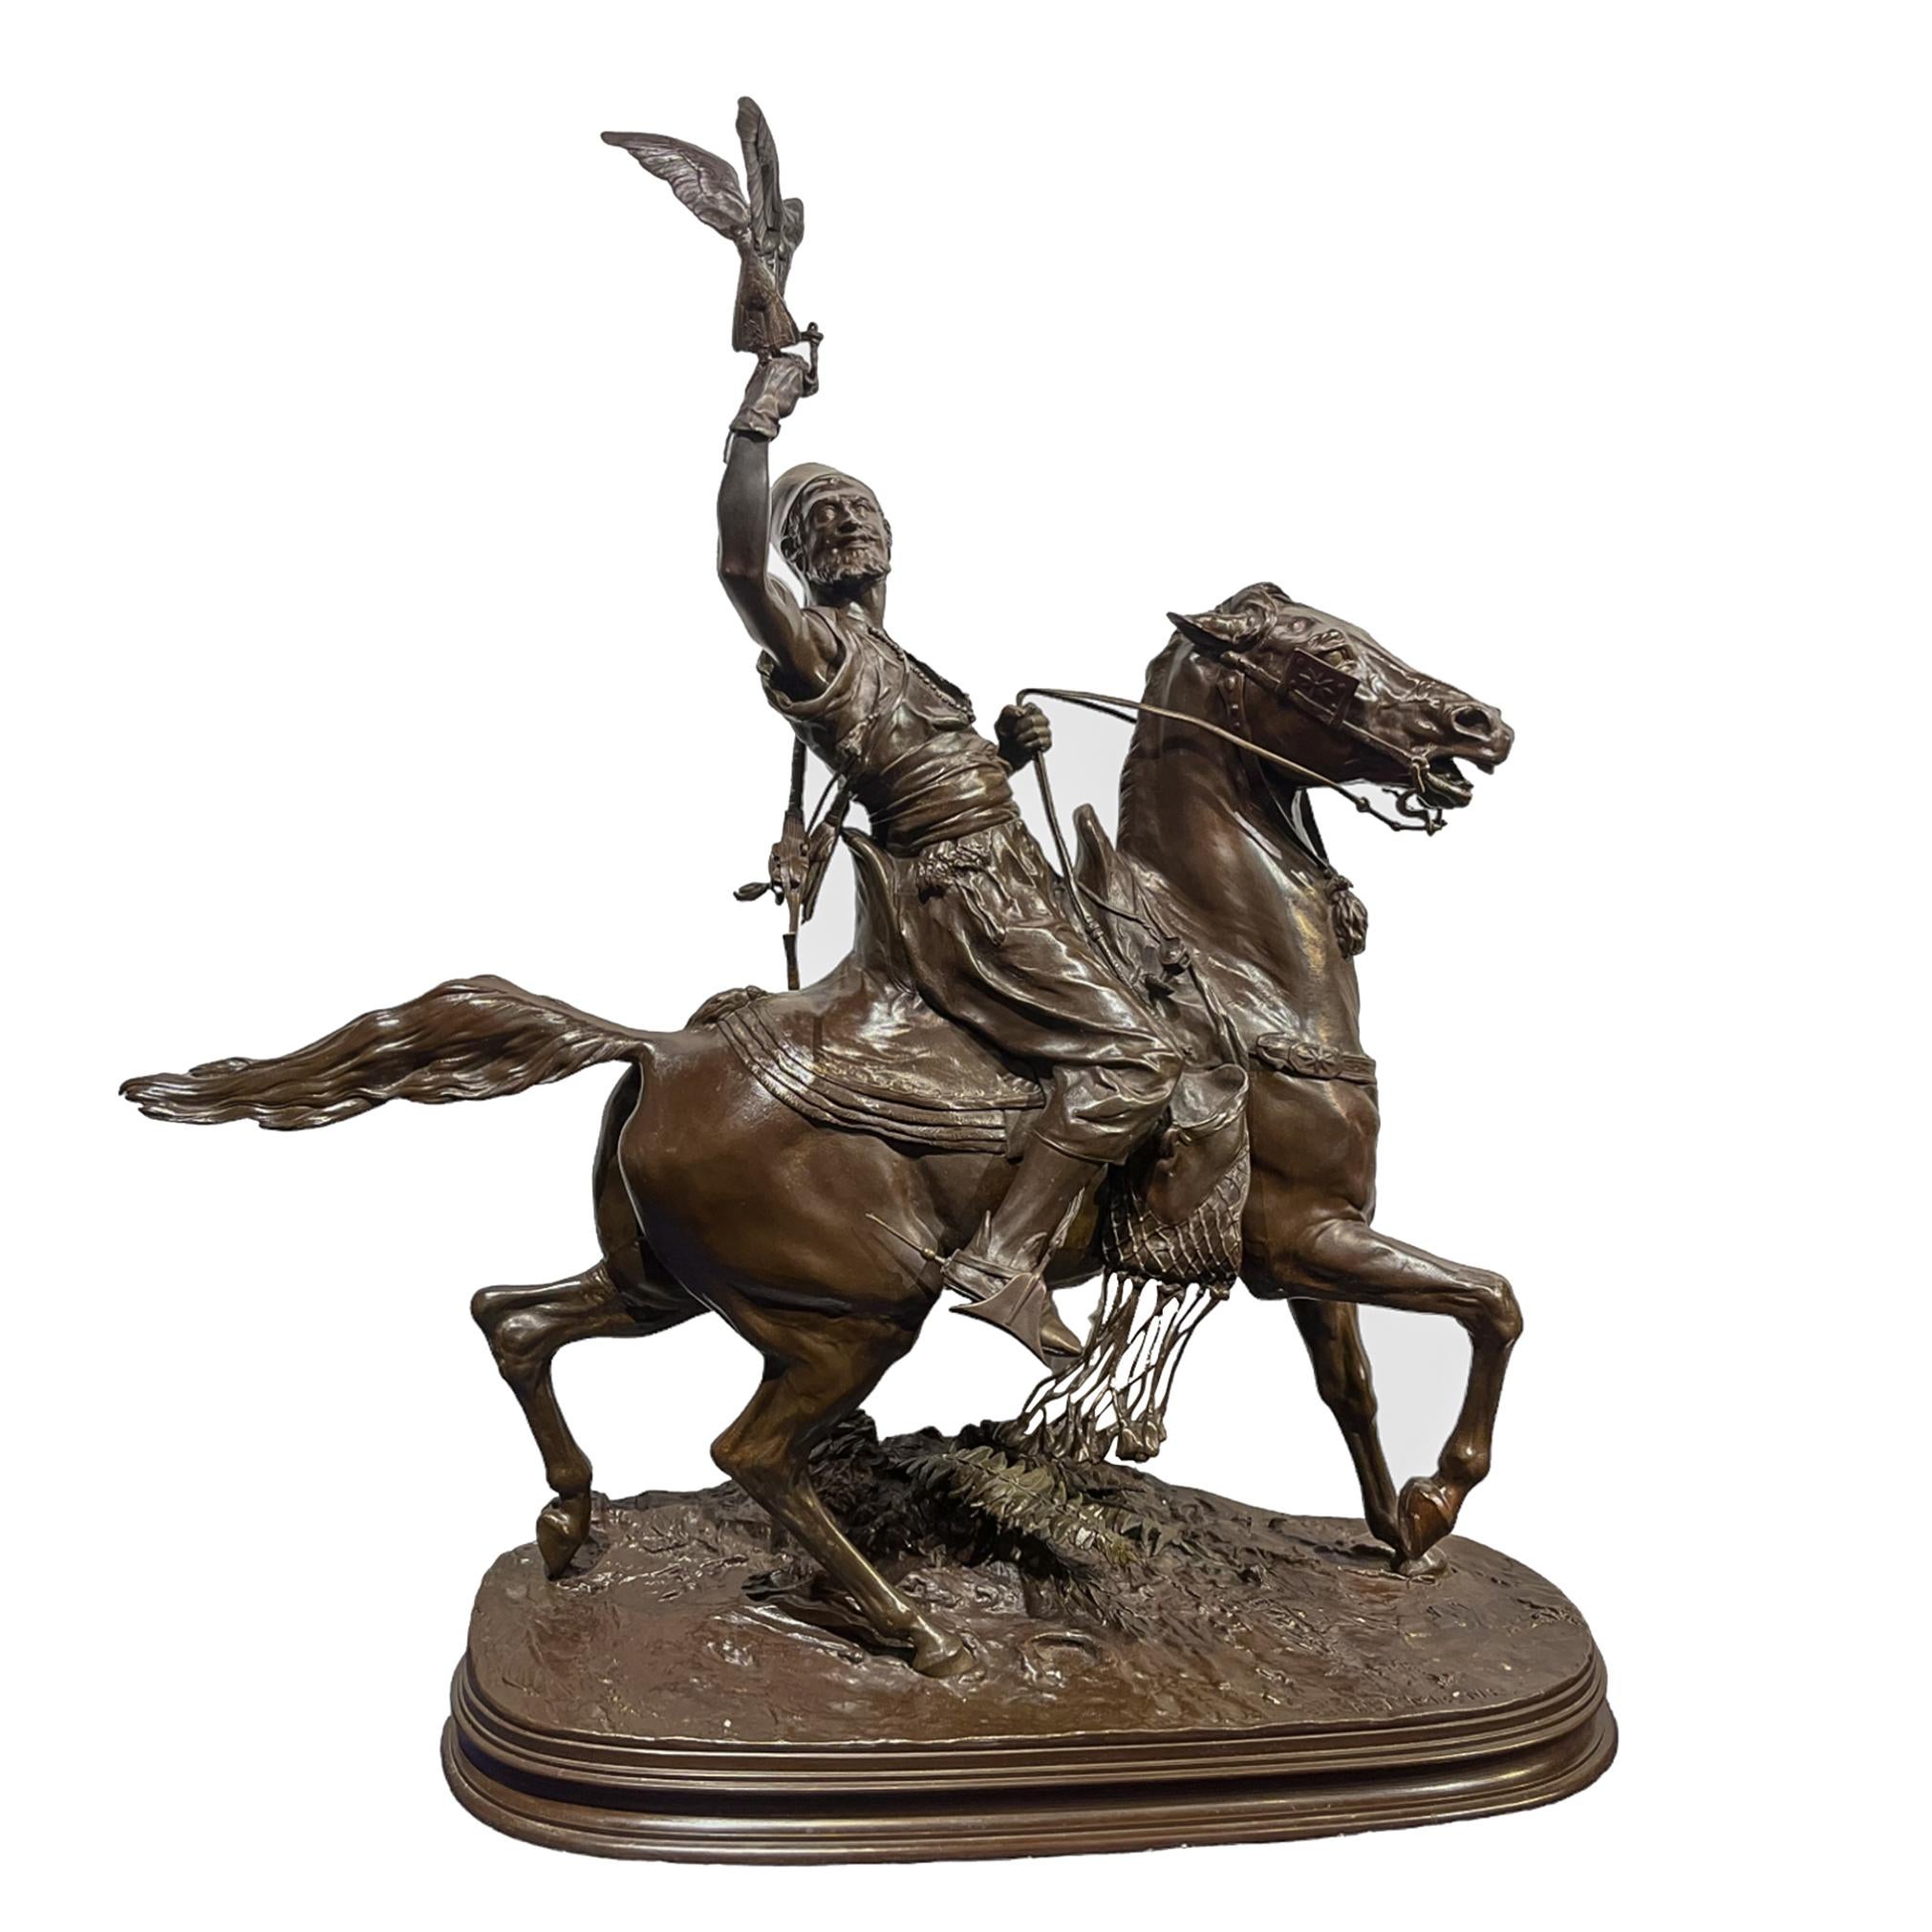 Dynamic statue of an Arab Falconer riding a horse in motion. A falcon lands on the falconer's arm as his horse trots along a mud road leaving hove prints behind. 

Artist: Pierre-Jules Mene (French, 1810-1879)

Material: bronze

signed P.J.